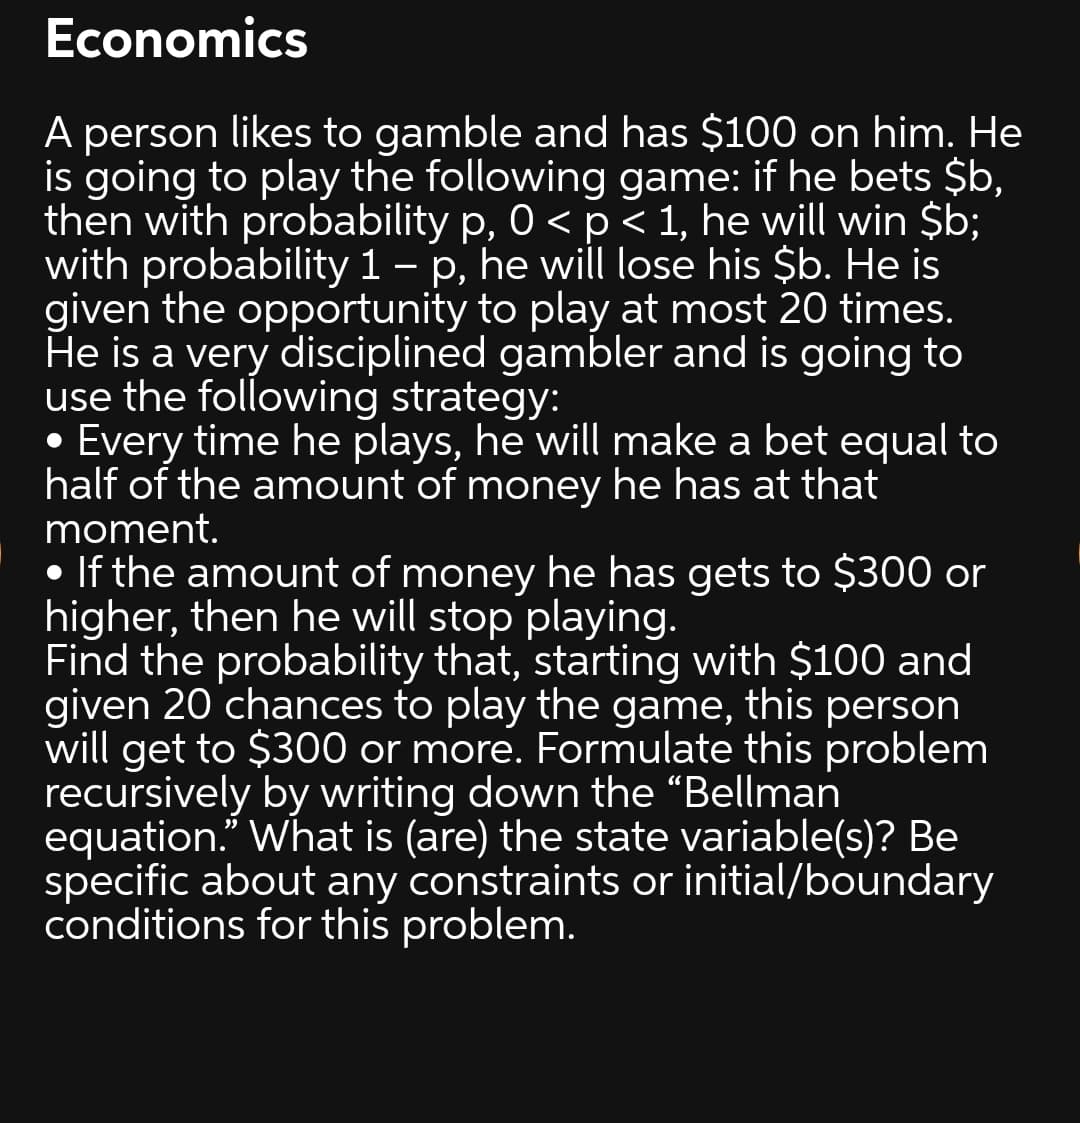 Economics
A person likes to gamble and has $100 on him. He
is going to play the following game: if he bets $b,
then with probability p, 0 < p< 1, he will win $b;
with probability 1 – p, he will lose his $b. He is
given the opportunity to play at most 20 times.
He is a very disciplined gambler and is going to
use the following strategy:
• Every time he plays, he will make a bet equal to
half of the amount of money he has at that
moment.
• If the amount of money he has gets to $300 or
higher, then he will stop playing.
Find the probability that, starting with $100 and
given 20 chances to play the game, this person
will get to $300 or more. Formulate this problem
recursively by writing down the “Bellman
equation." What is (are) the state variable(s)? Be
specific about any constraints or initial/boundary
conditions for this problem.
